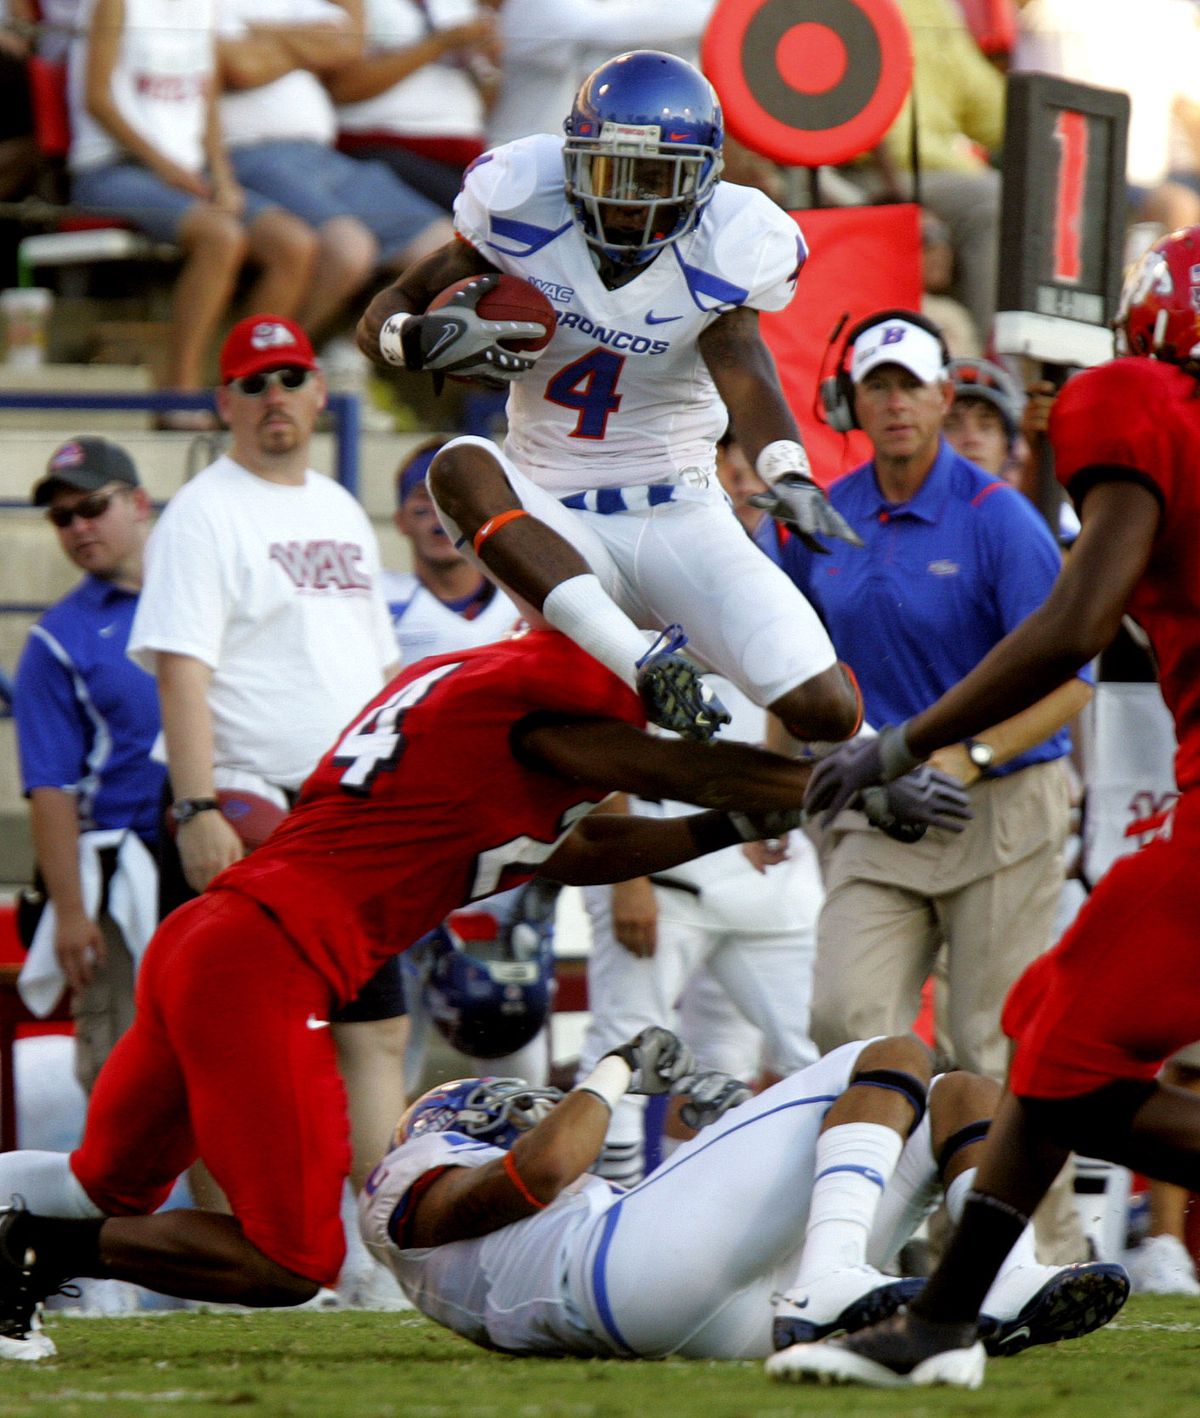 Boise State’s Titus Young jumps over Fresno State’s Desia Dunn in the first half.  (Associated Press / The Spokesman-Review)